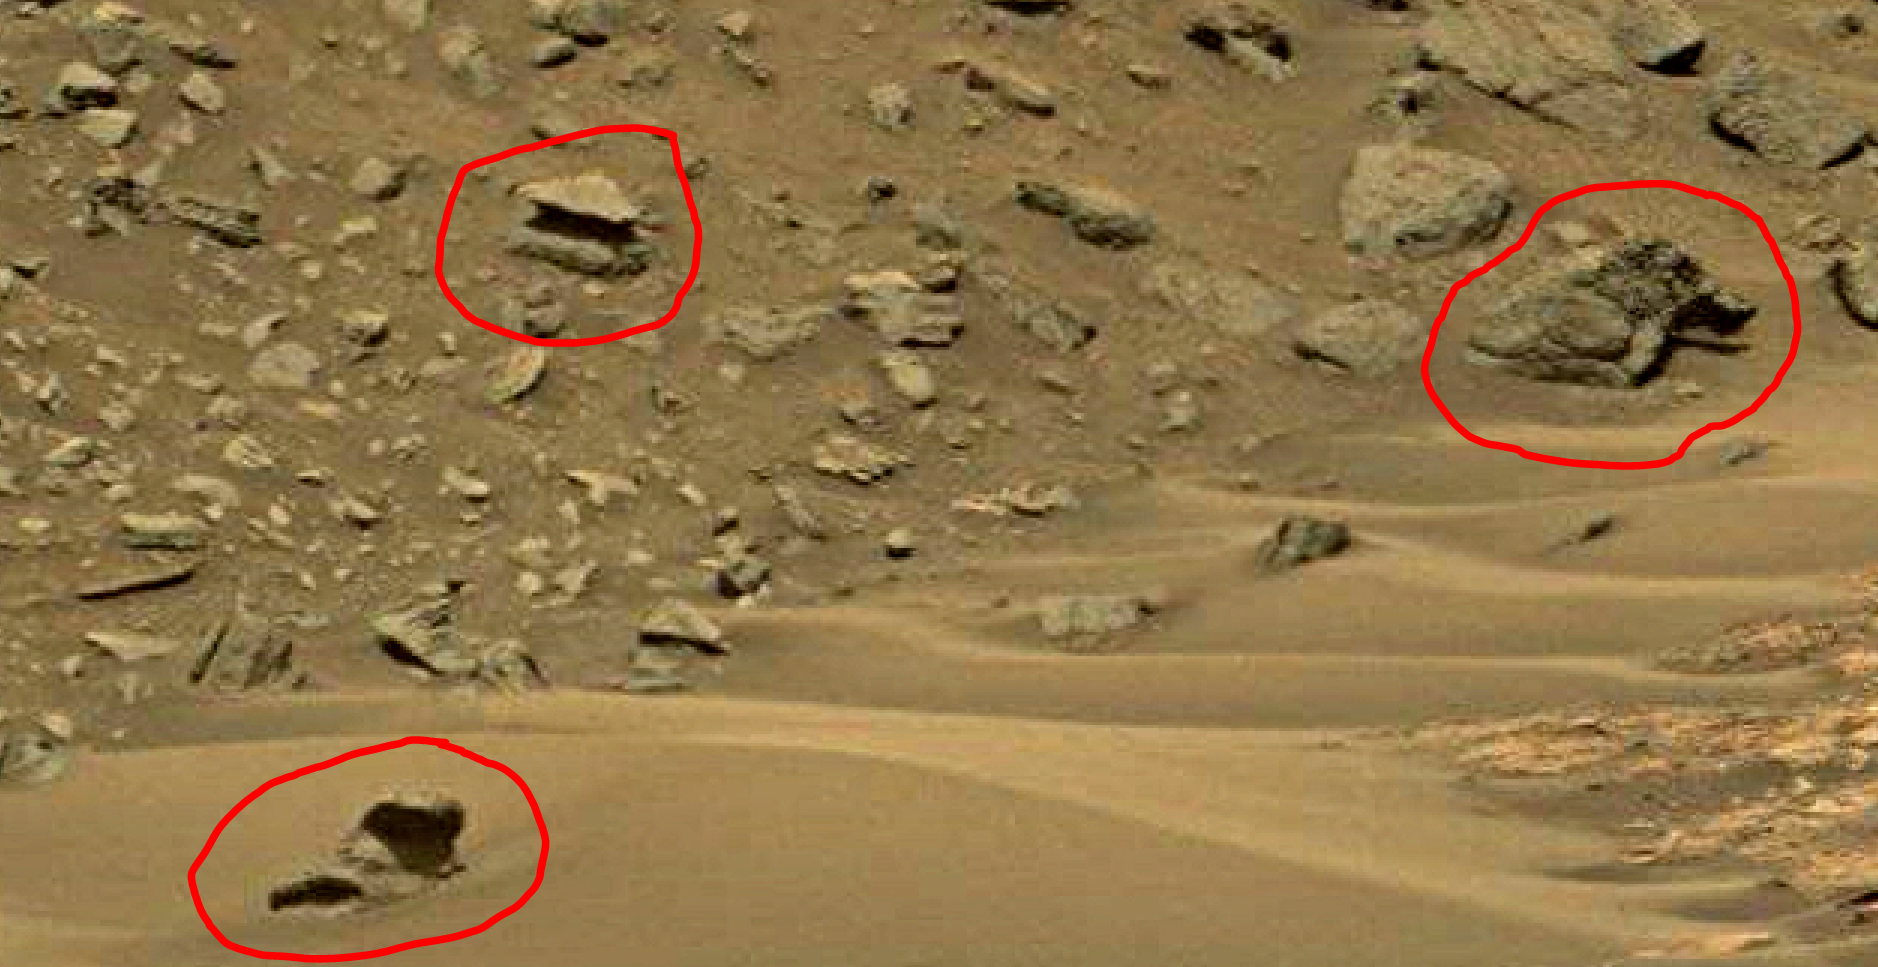 mars-sol-1454-anomaly-artifacts-20-was-life-on-mars